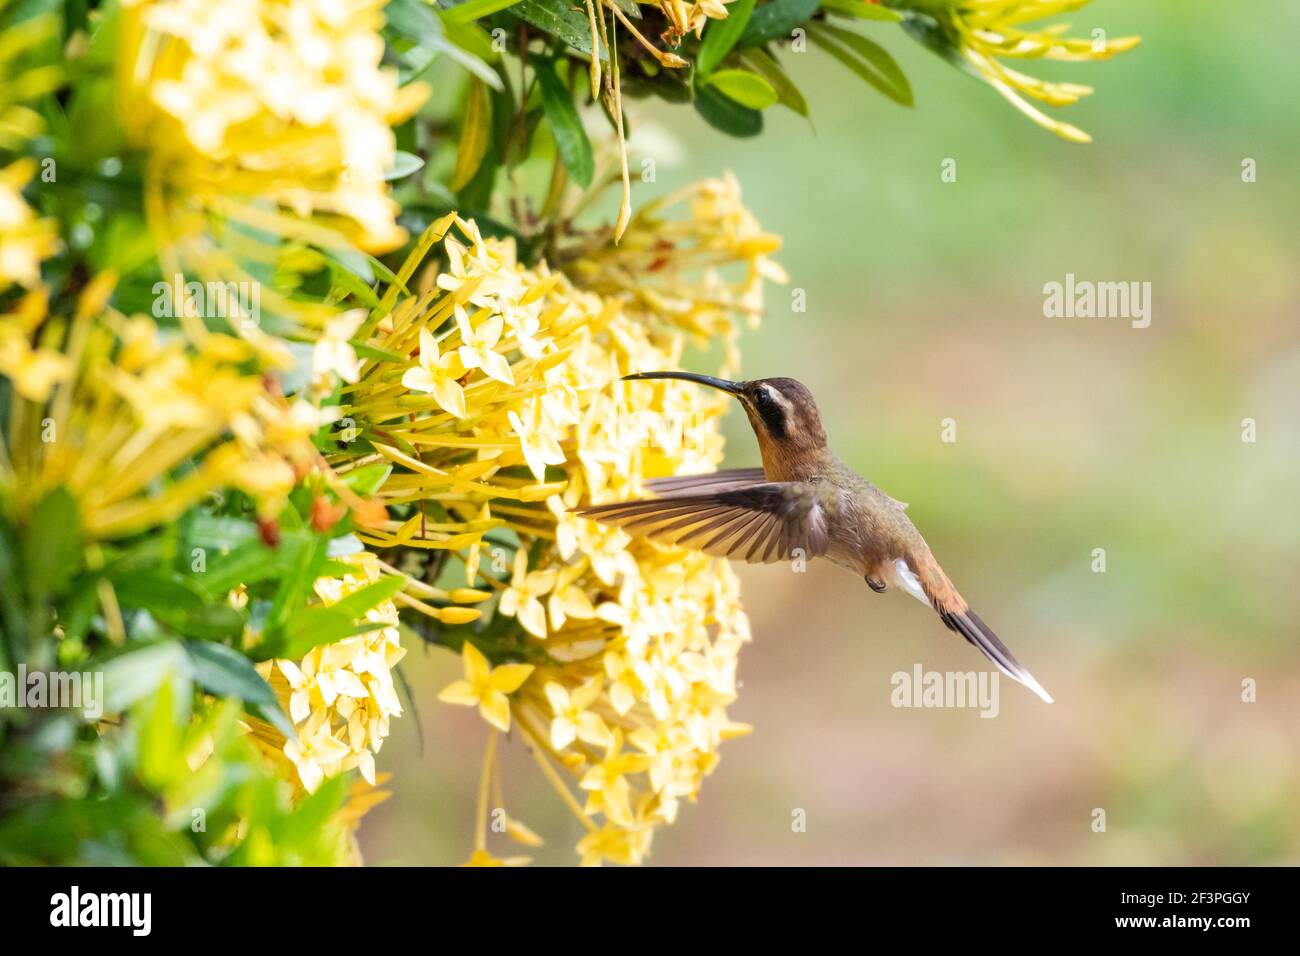 A Little Hermit hummingbird feeding on a yellow Ixora hedge in a tropical garden. Wildlife in nature. Stock Photo